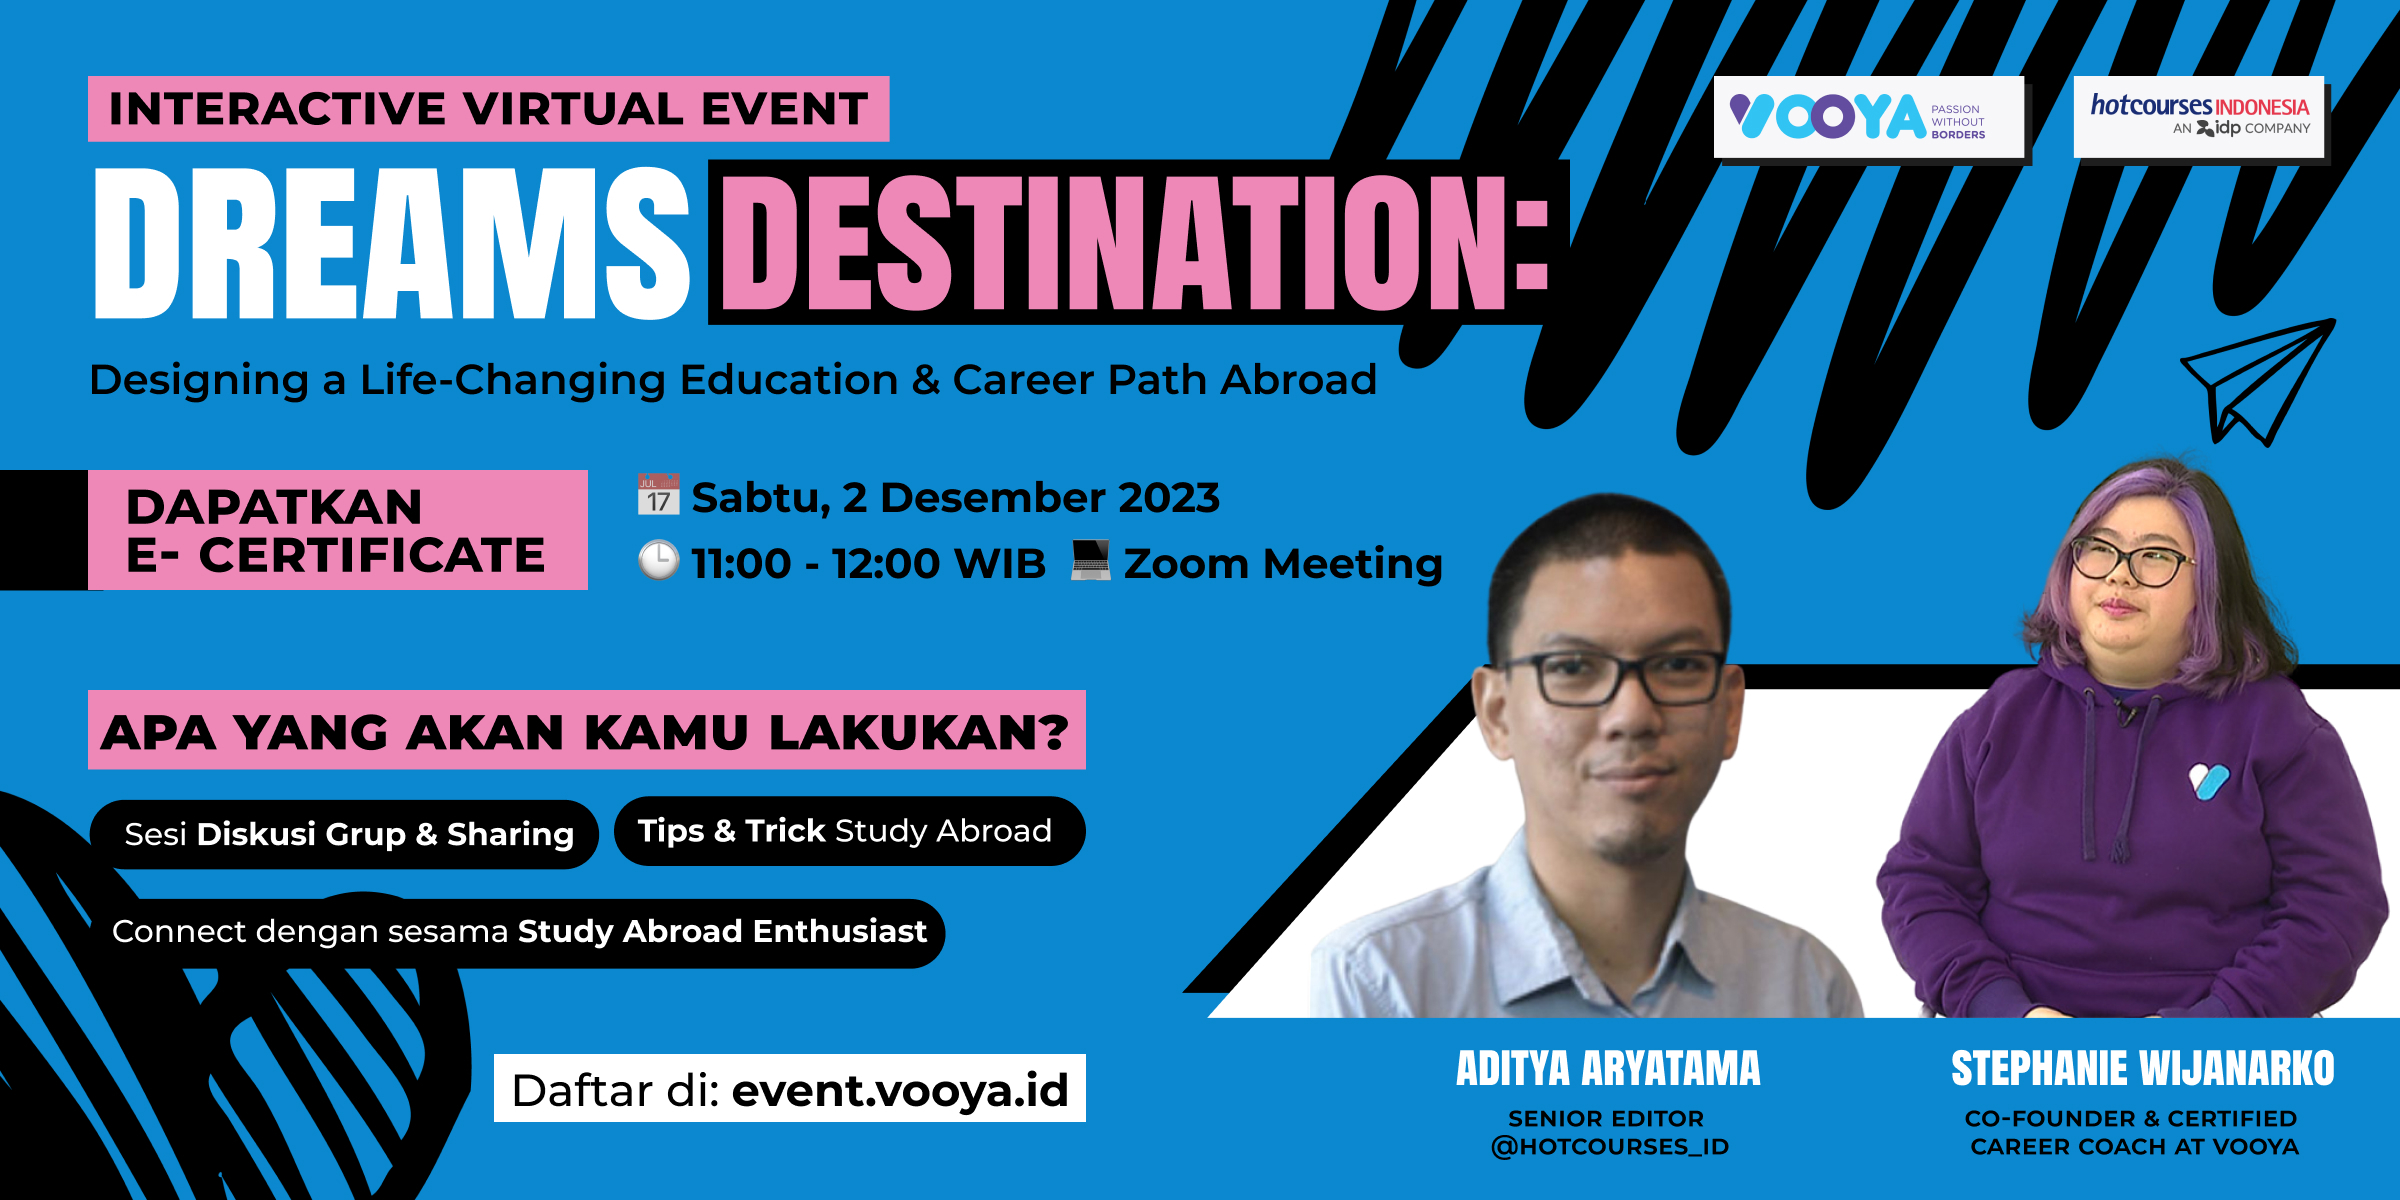 Dreams Destination: Designing a Life-Changing Education & Career Path Abroad